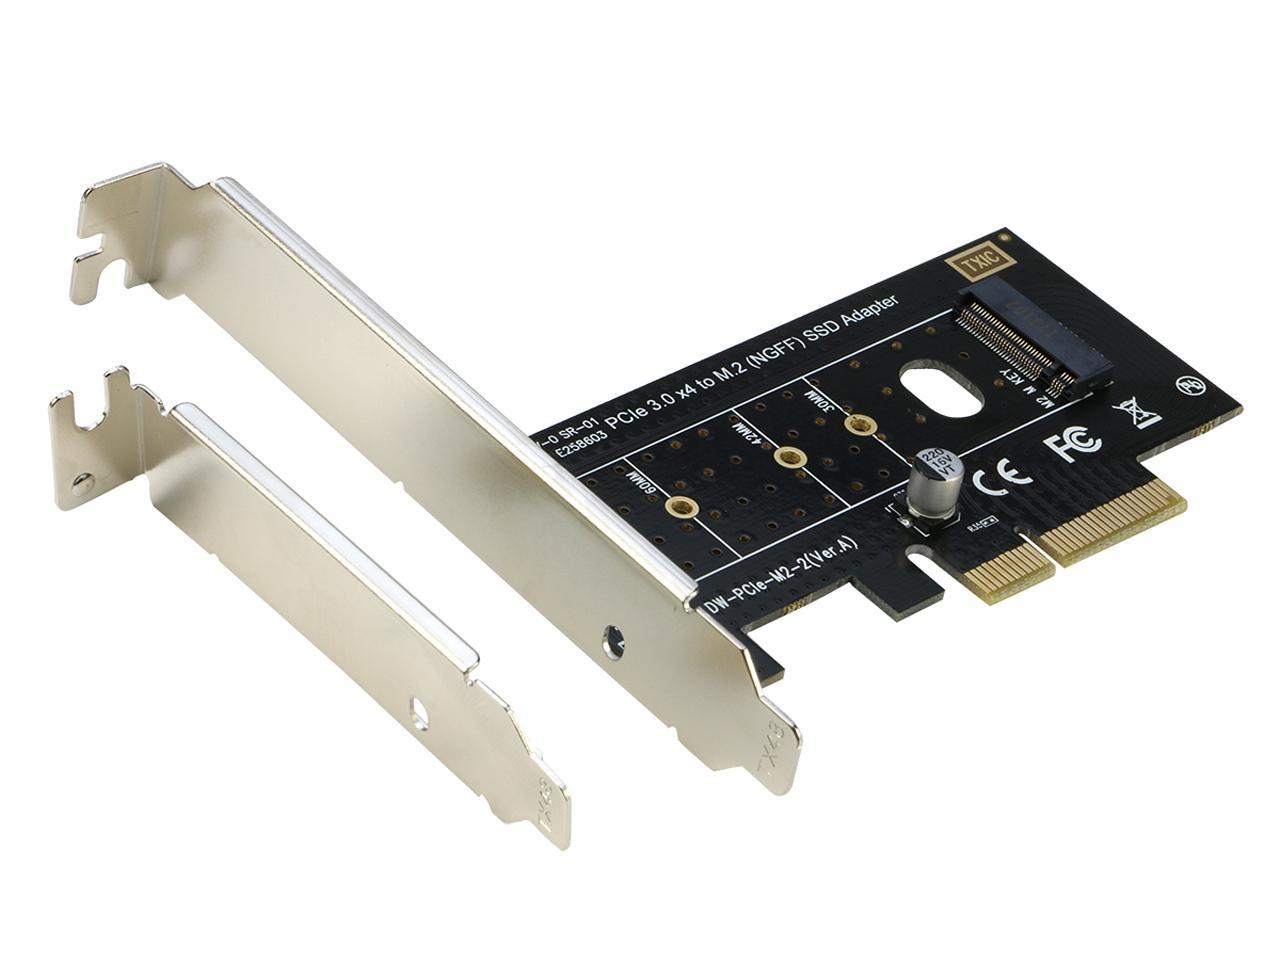 M-Key novonest NVME PCIE 4.0 Adapter,M.2 NVME SSD to PCI Express Adapter with Turbofan,Support M.2 NVME SSD 2230/2242/2260/2280/22110,Support PCIE 4.0 X4/X8/X16 Slot,SK8 